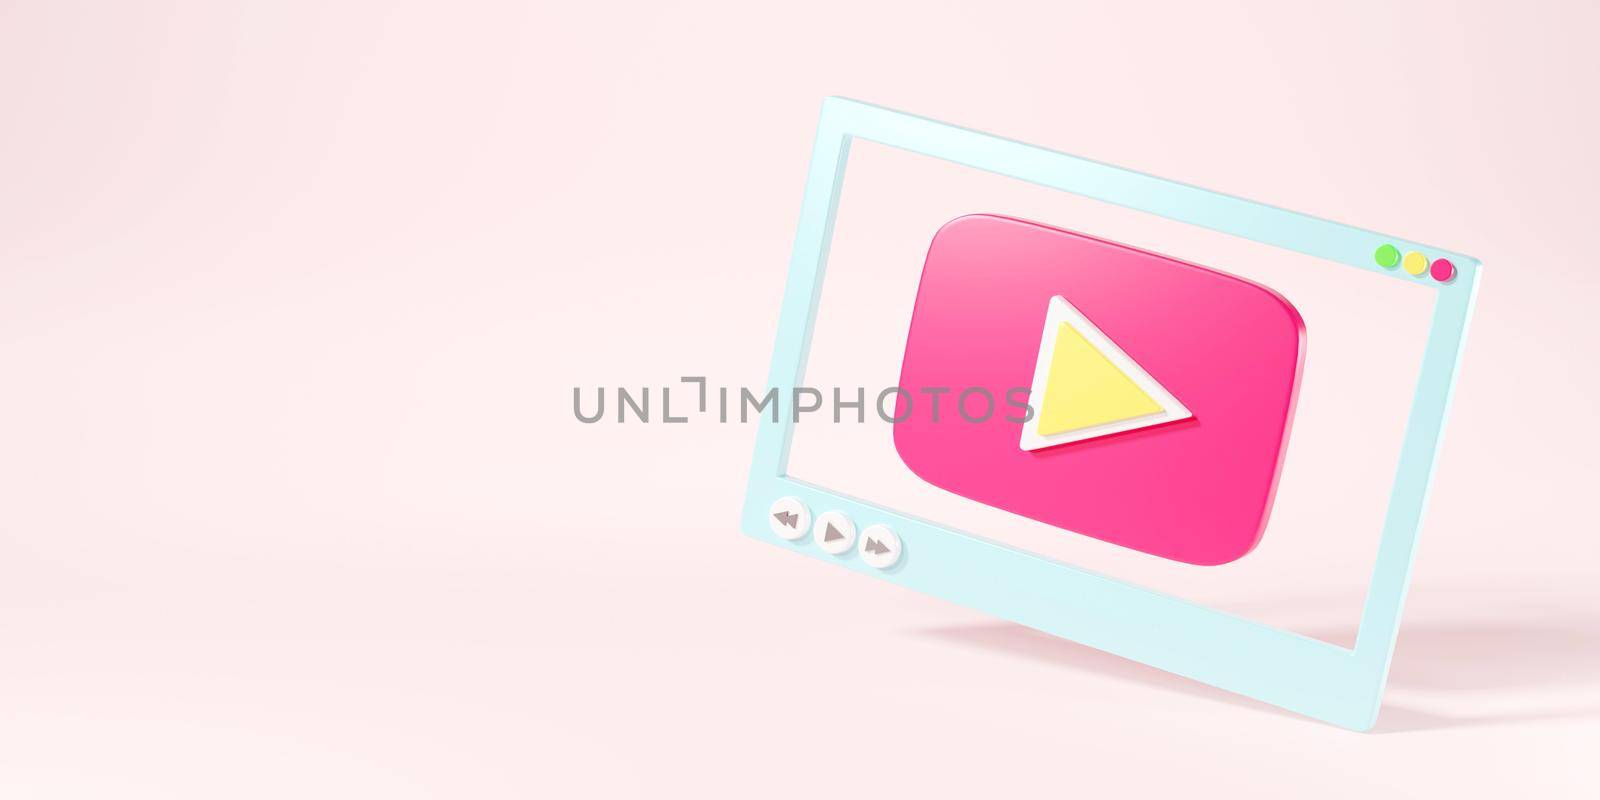 Video media player screen interface for social media template for web or mobile apps on pink background, Play movie video online mock up, 3D rendering illustration